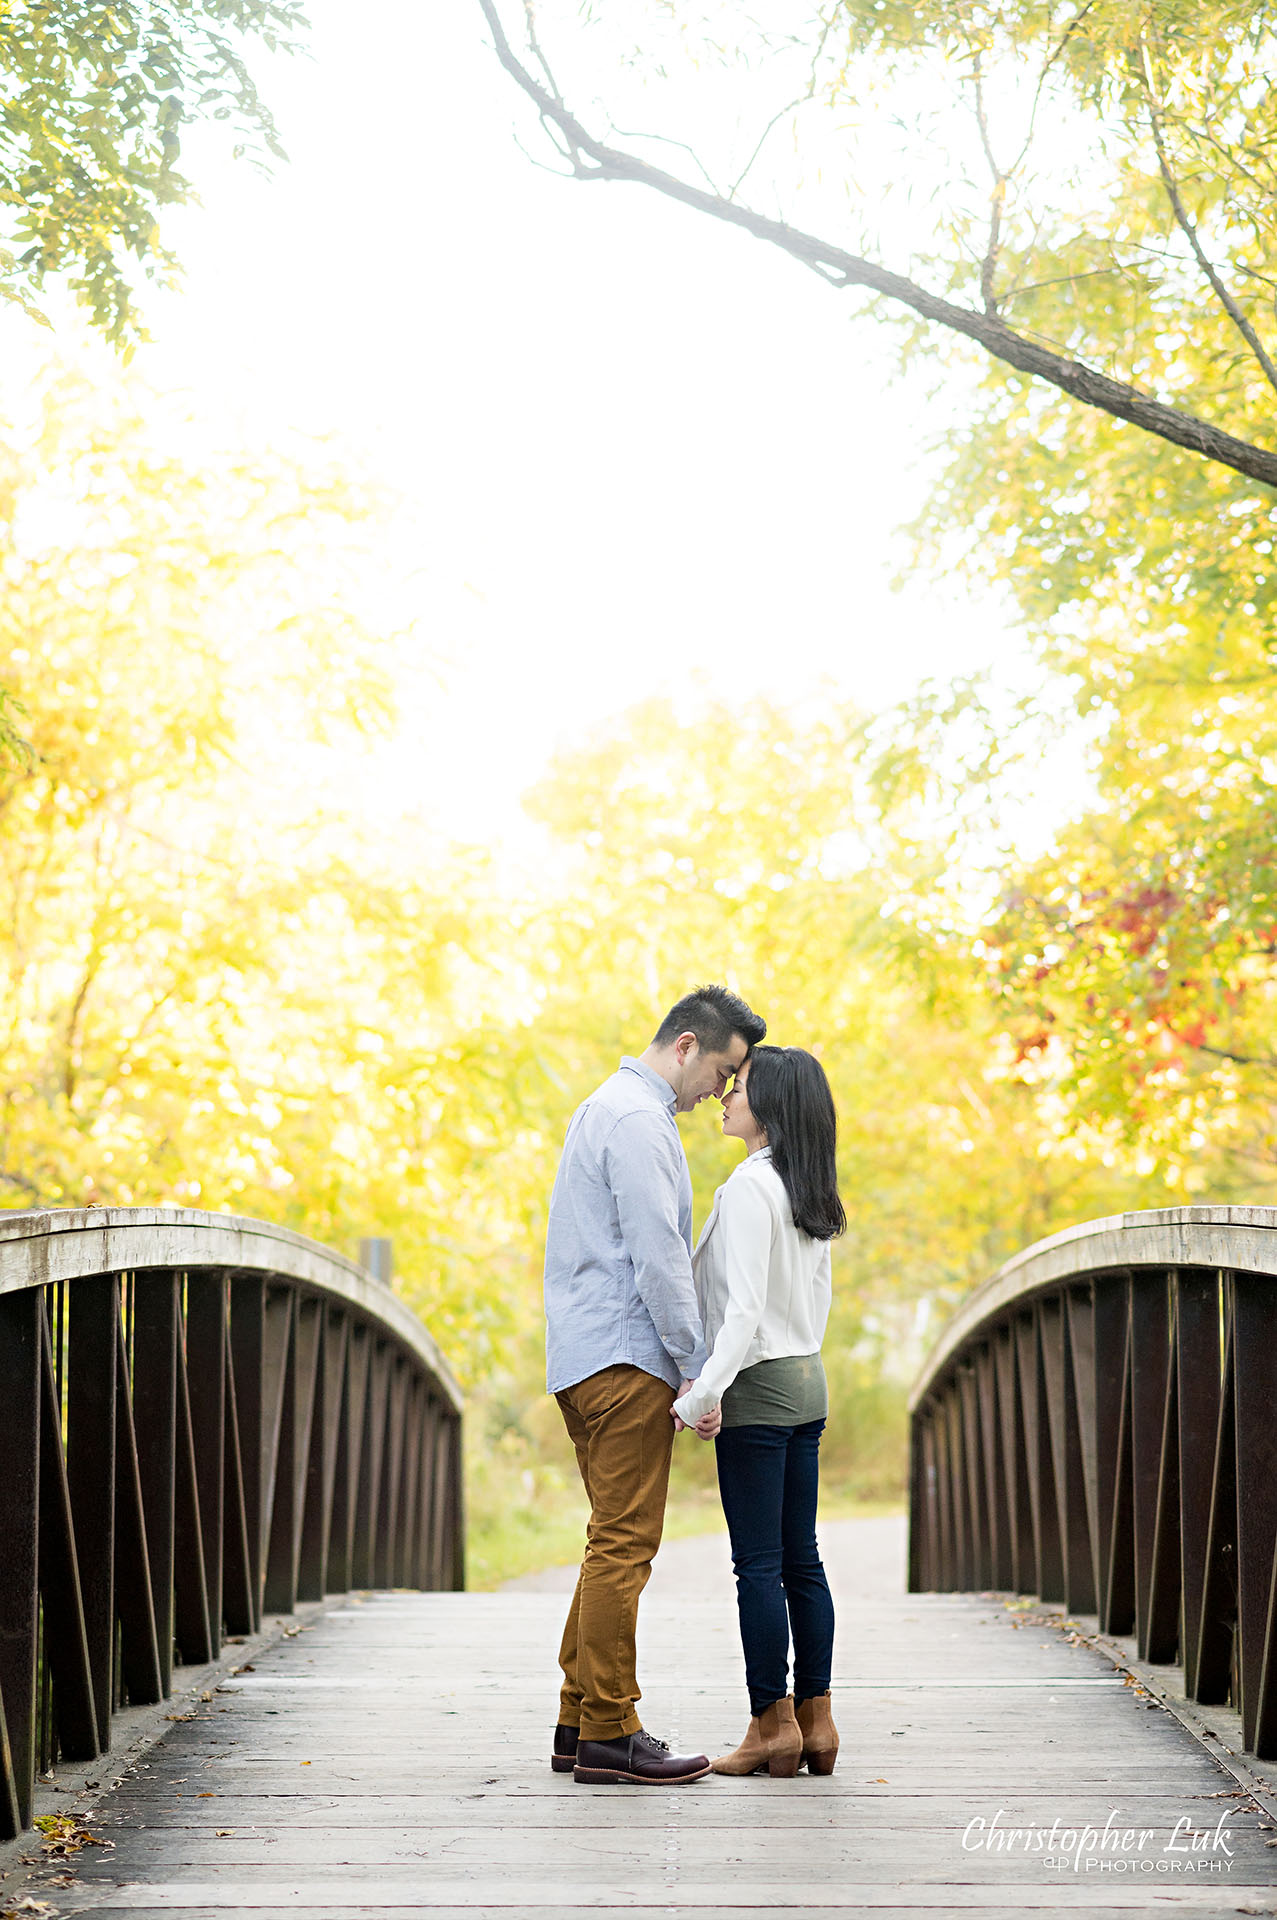 Mother Father Intimate Moment Together on Bridge Autumn Fall Leaves Markham Unionville Toronto Family Photographer